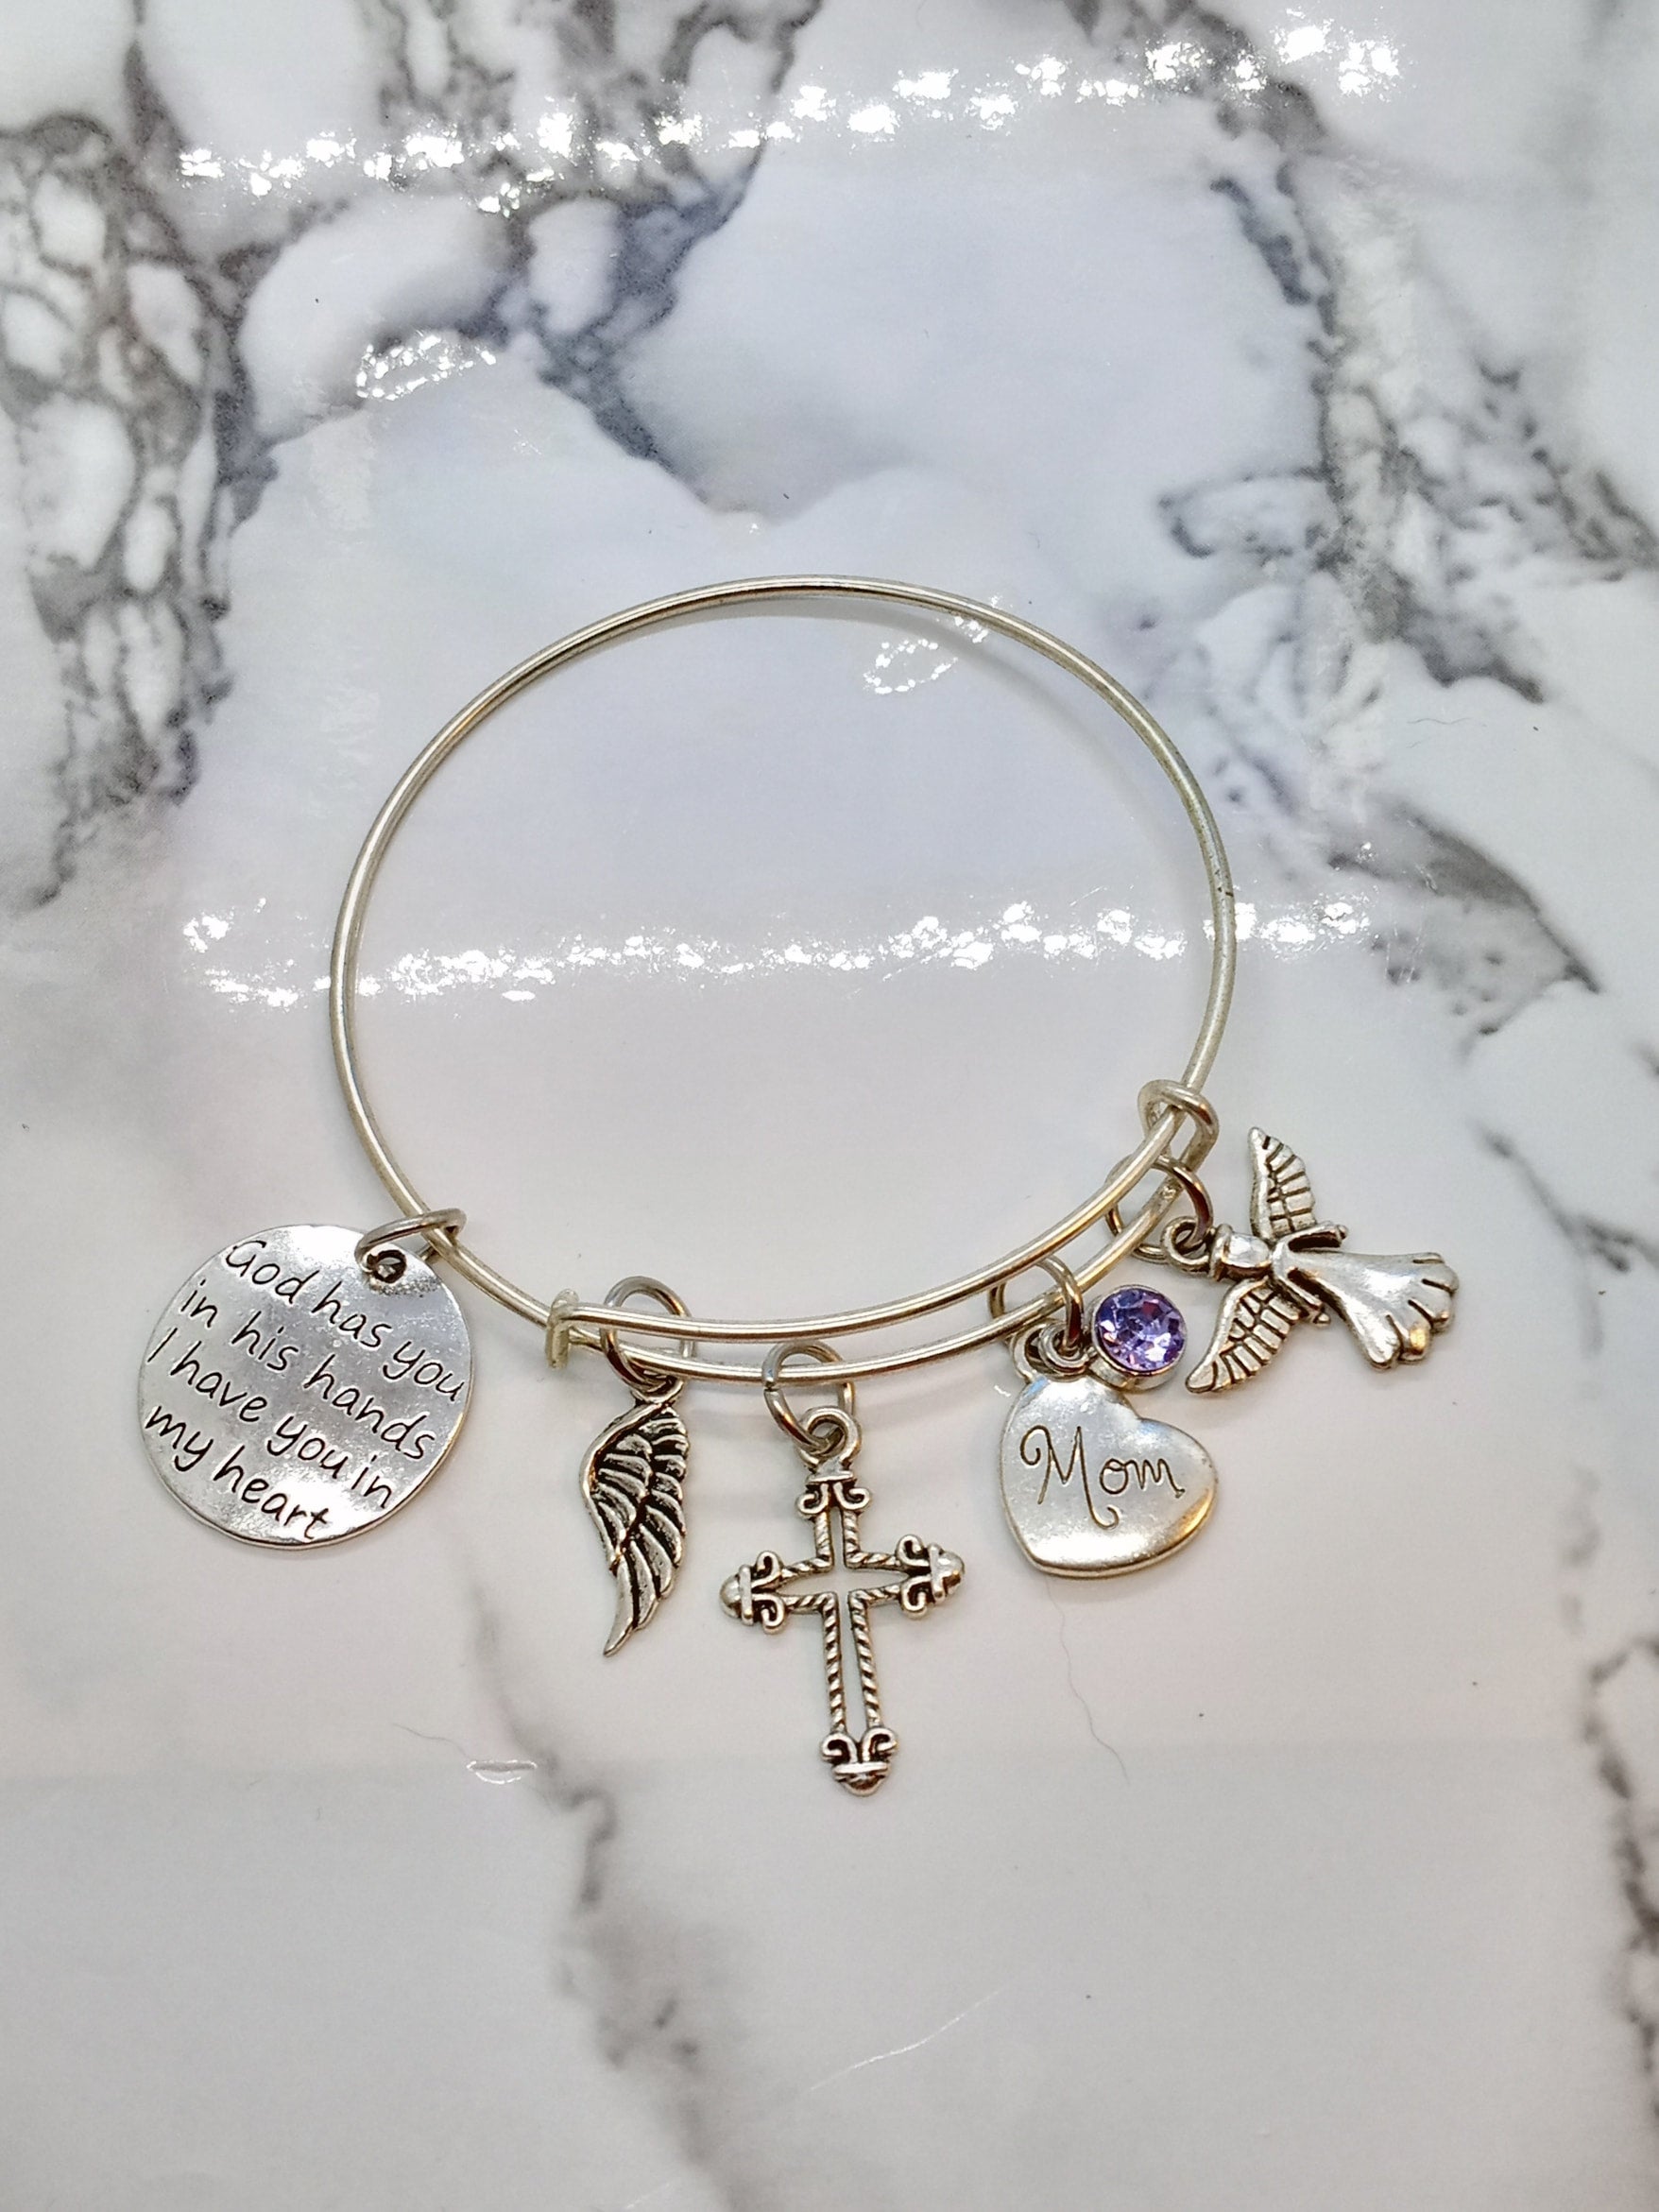 Amazon.com: Memorial Bracelet, Dad of an angel, Dad little angel Gifts,loss  Of Loved One,Remembrance Loss of Dad Jewelry,Adjustable Friendship Bracelets,rope  bracelet: Clothing, Shoes & Jewelry